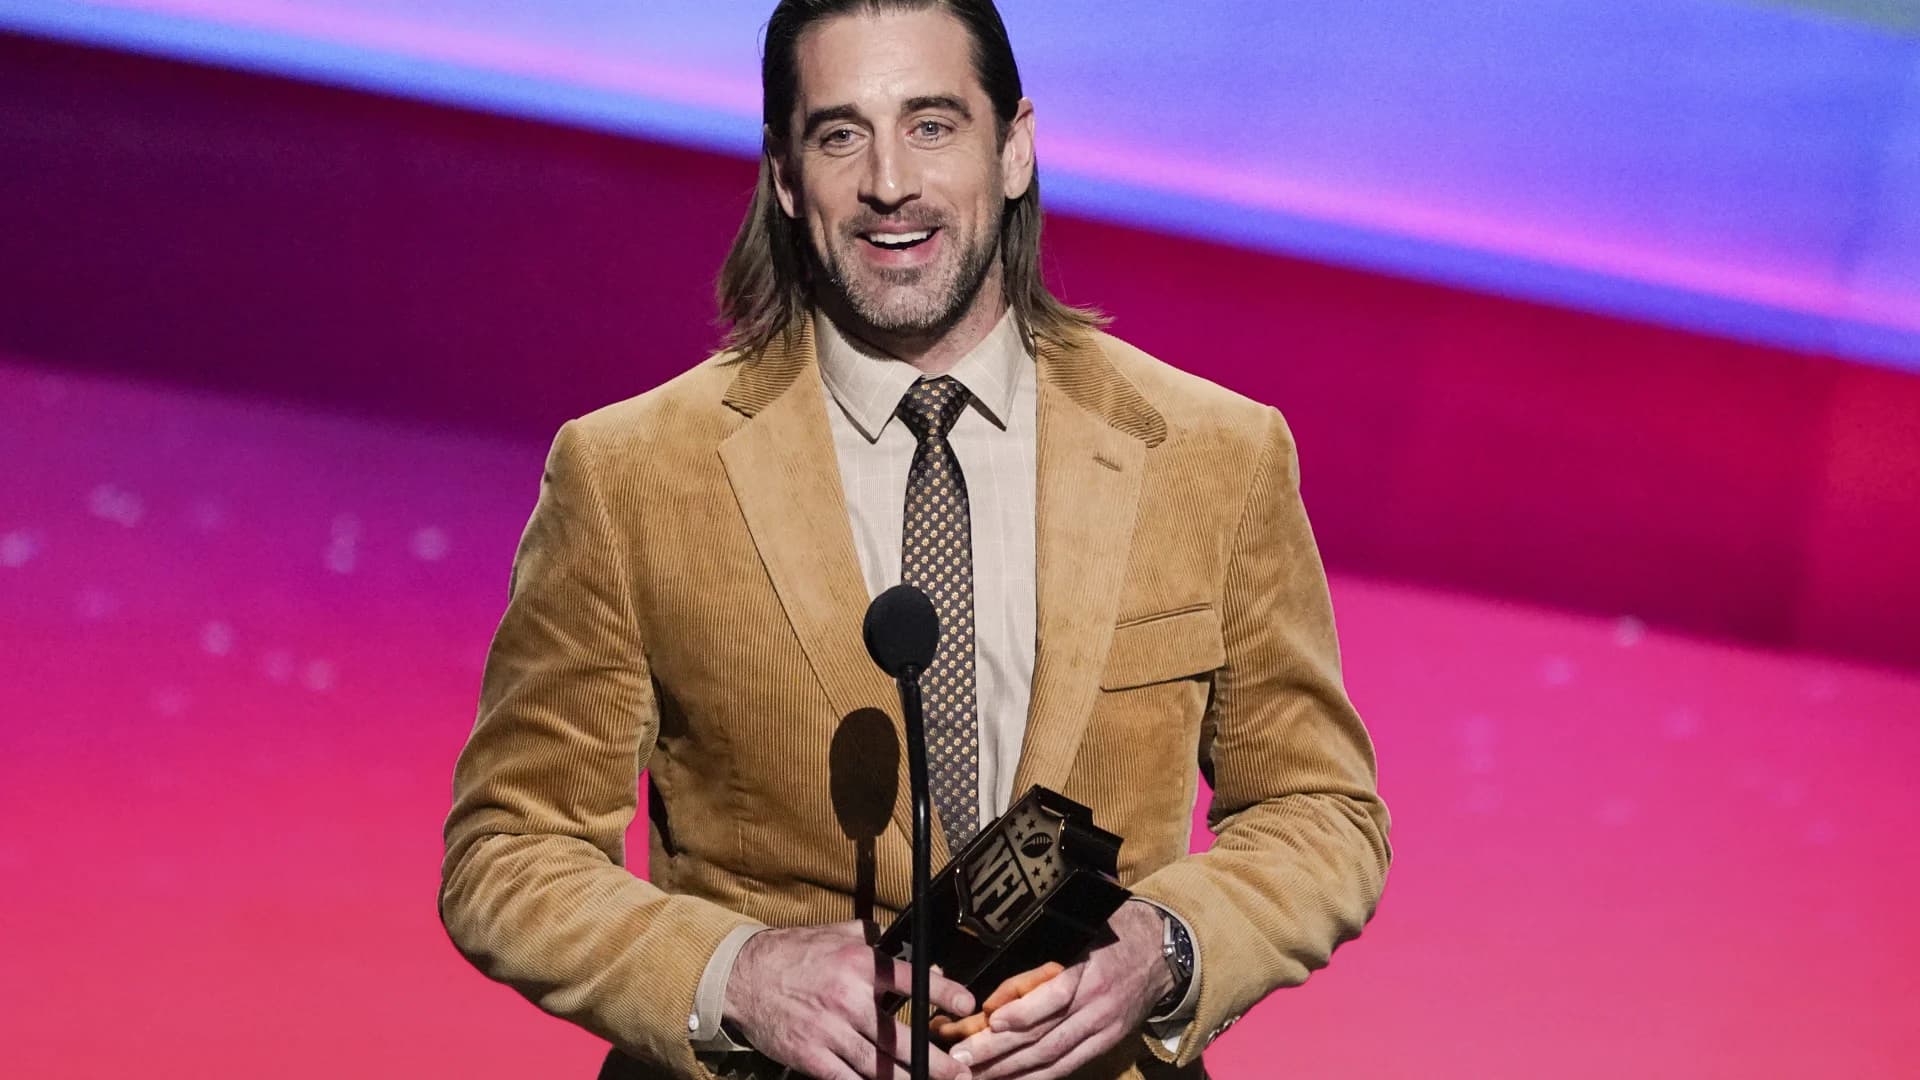 Packers QB Aaron Rodgers earns 4th MVP award, 2nd in a row